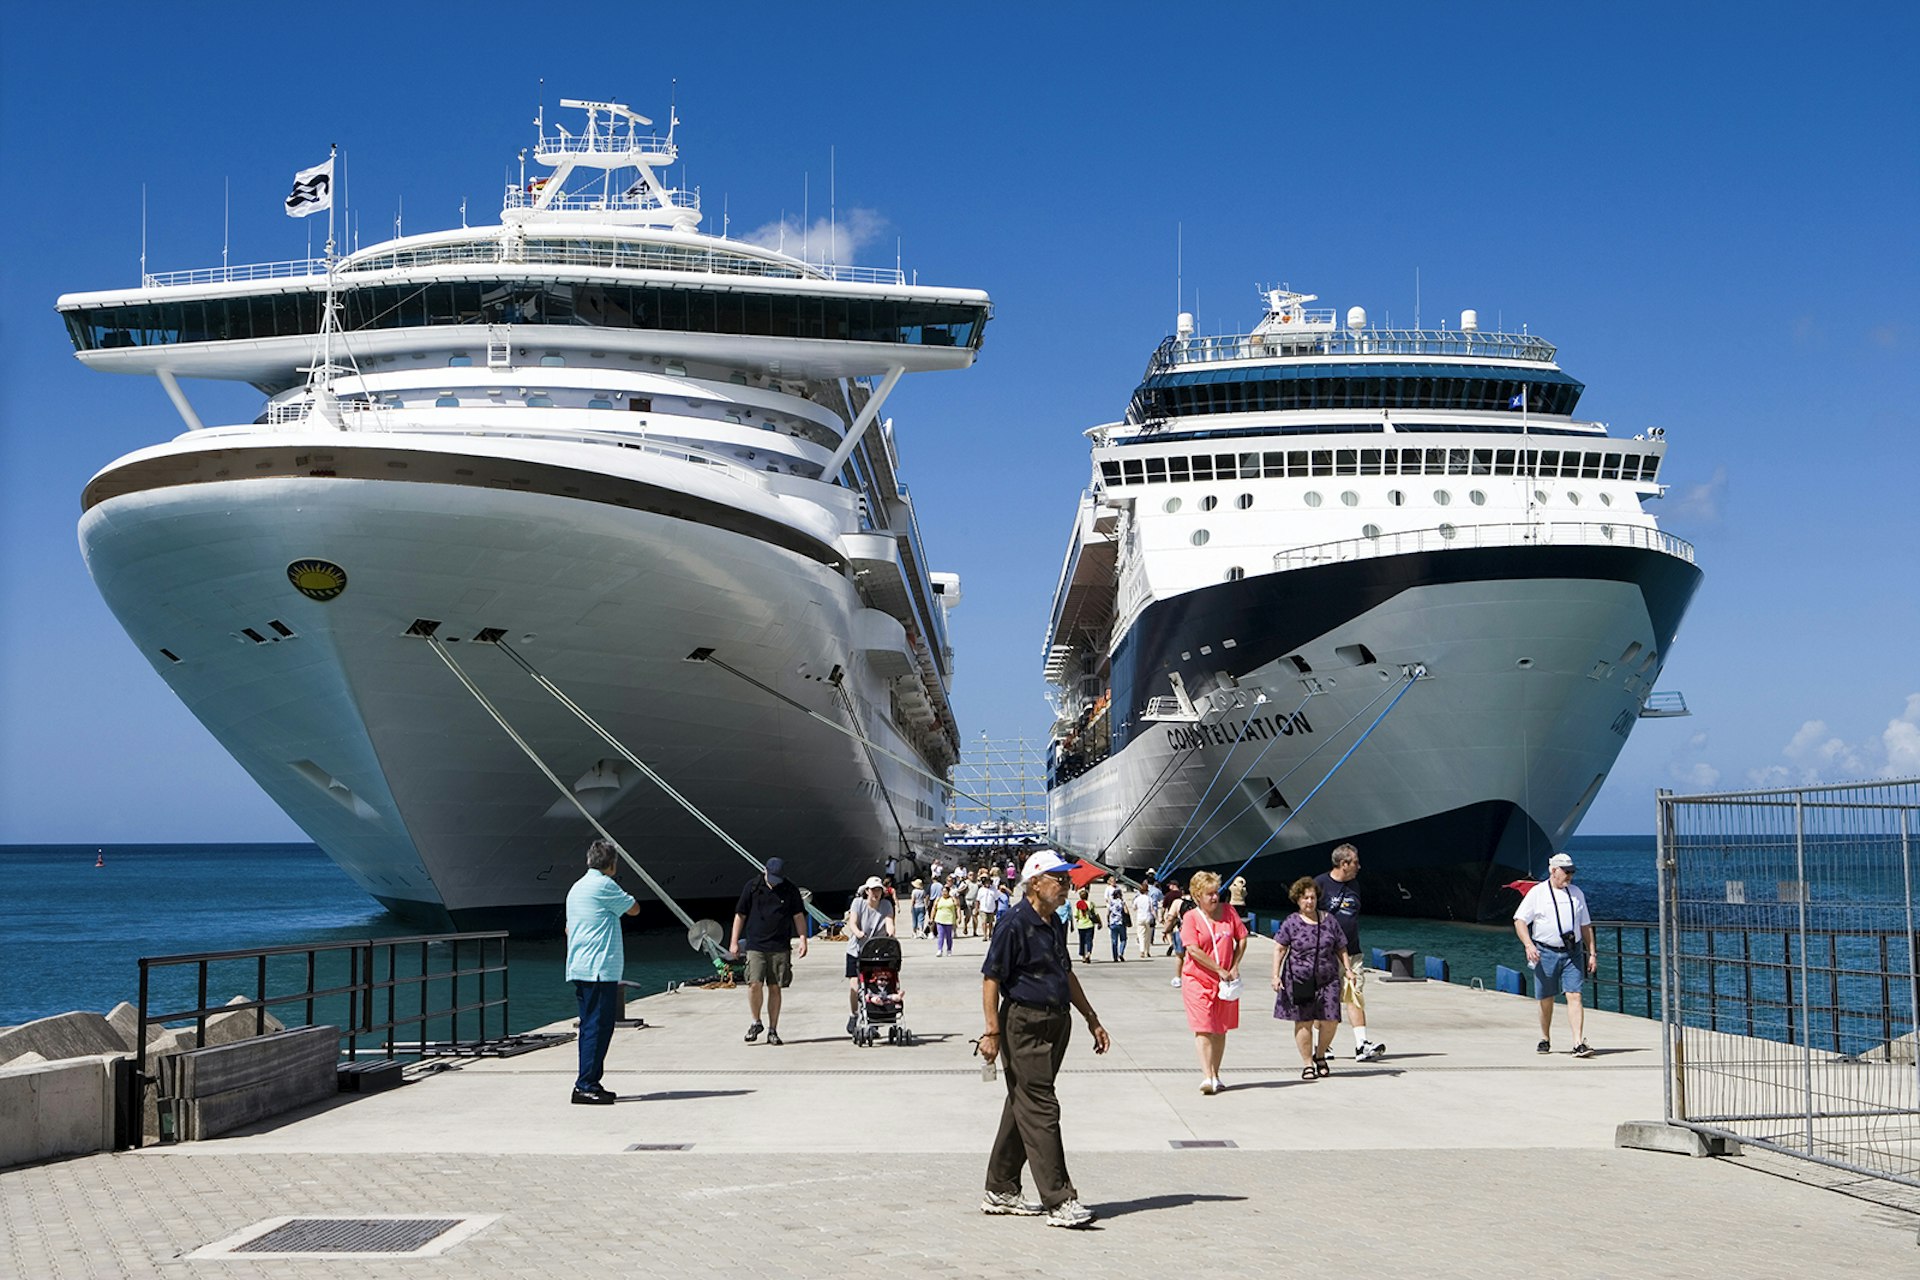 Features - Cruise ships 'Golden Princess' and 'Constellation', St George's, St George, Grenada, Central America &amp; the Caribbean